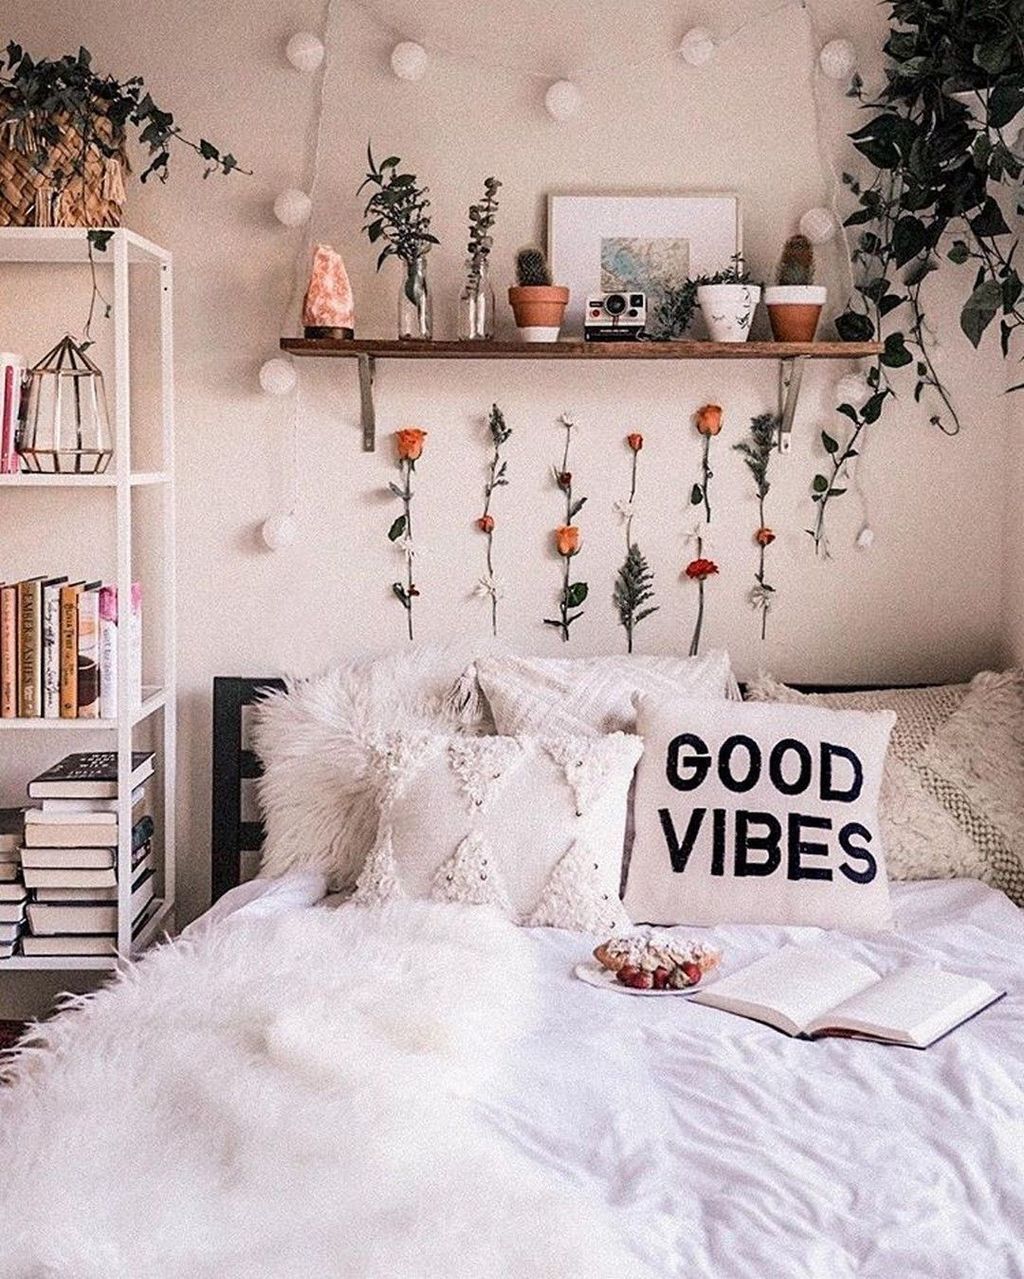 32 The Best DIY Bedroom Decor Ideas You Have To Try - PIMPHOMEE